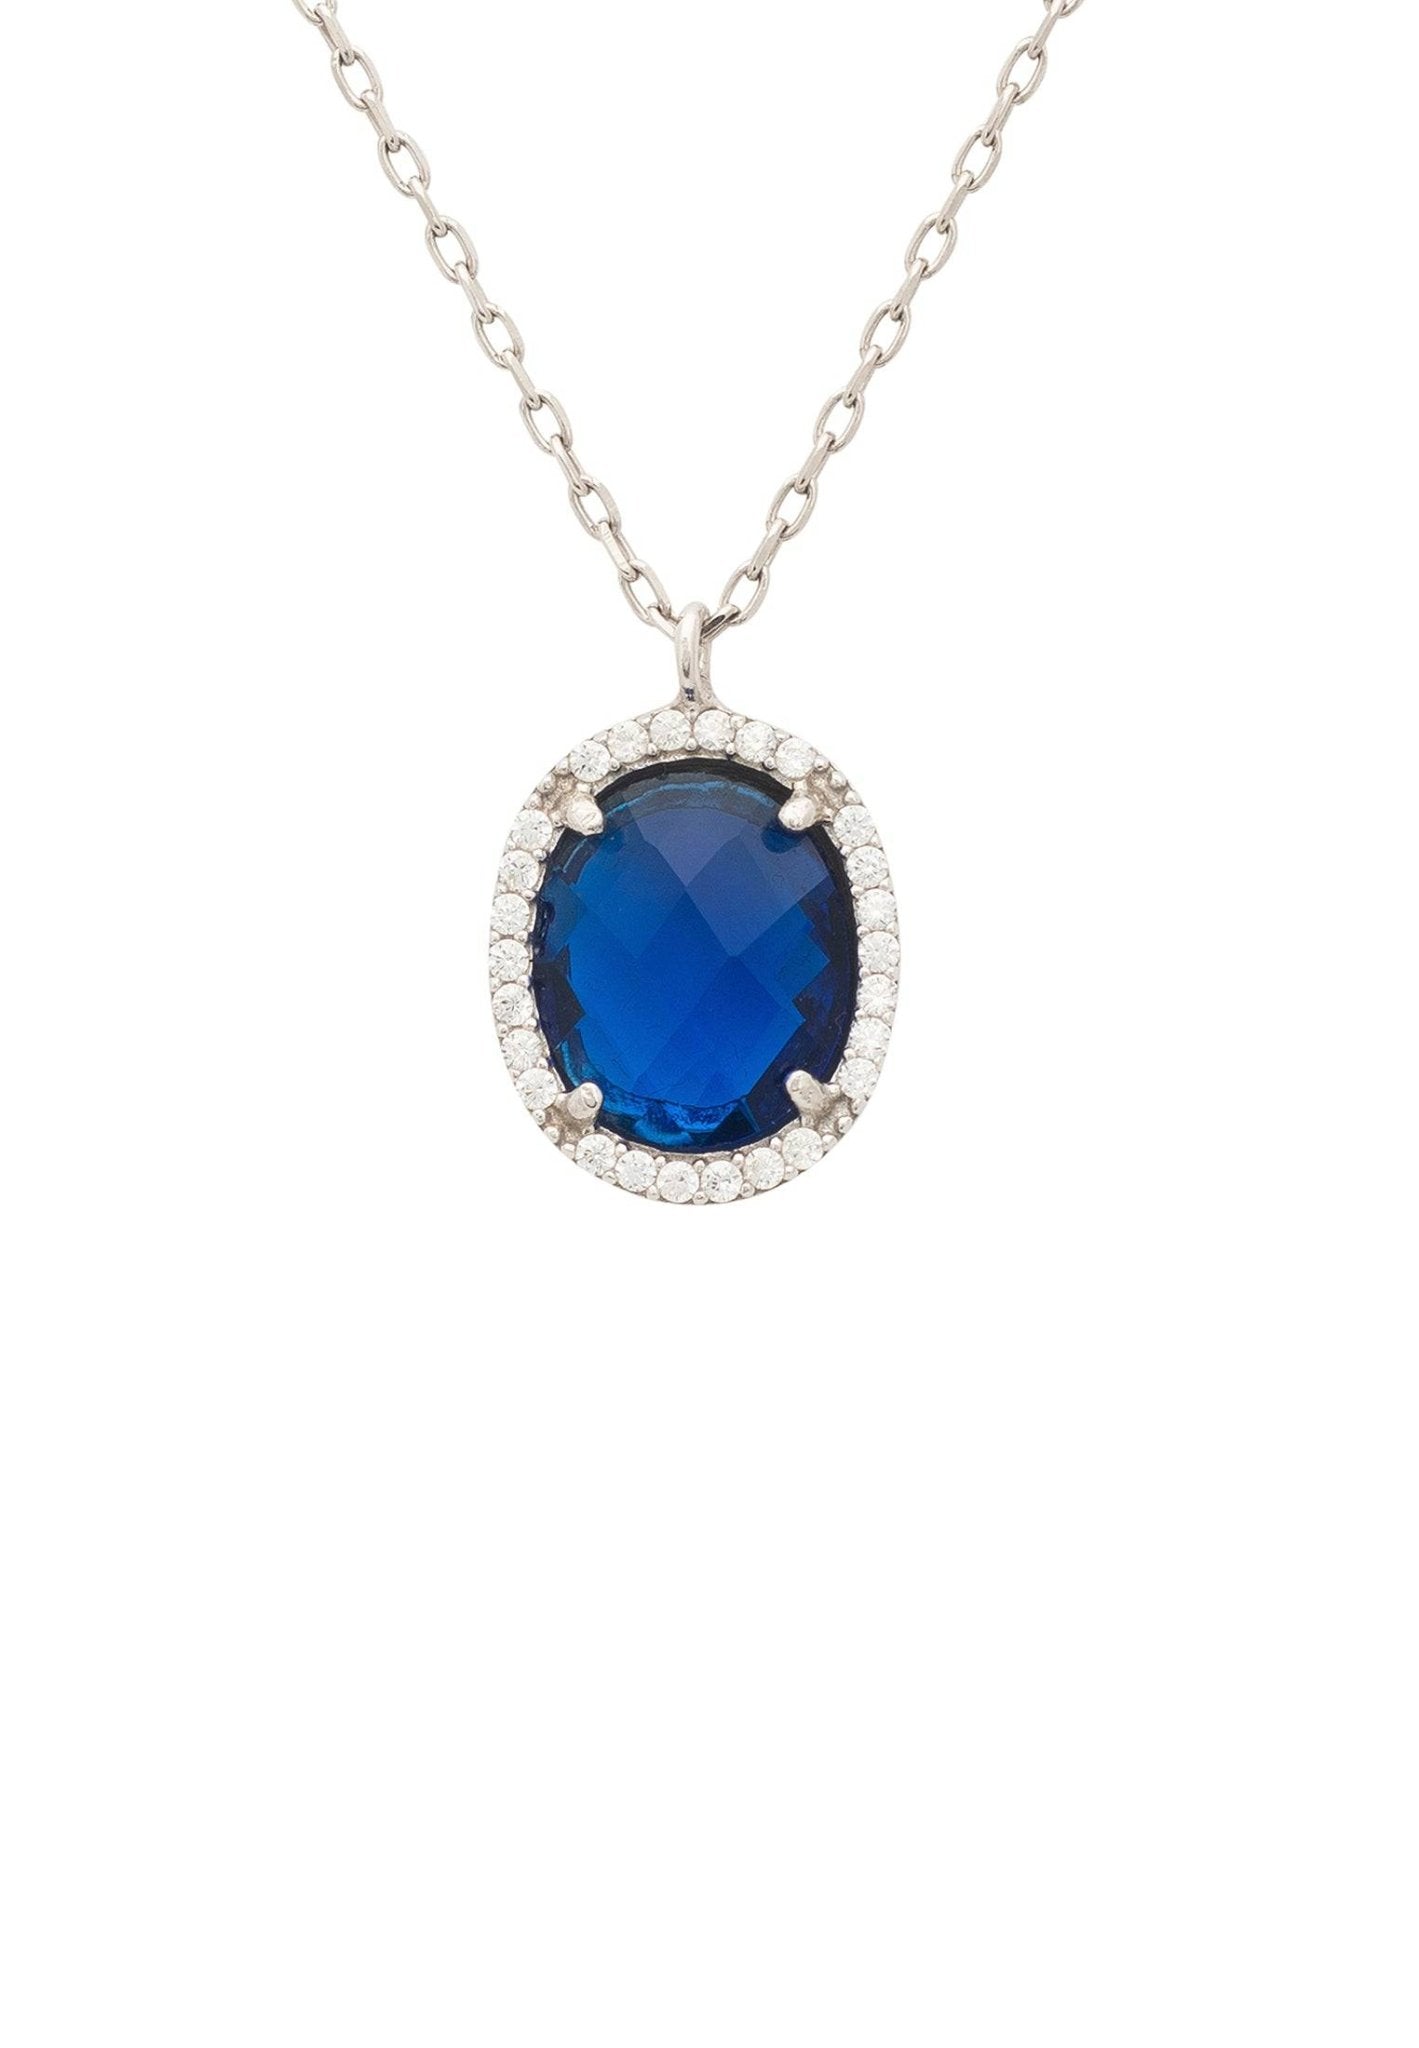 Beatrice Oval Gemstone Pendant Necklace Silver Sapphire Hydro - Allure SocietyNecklaces